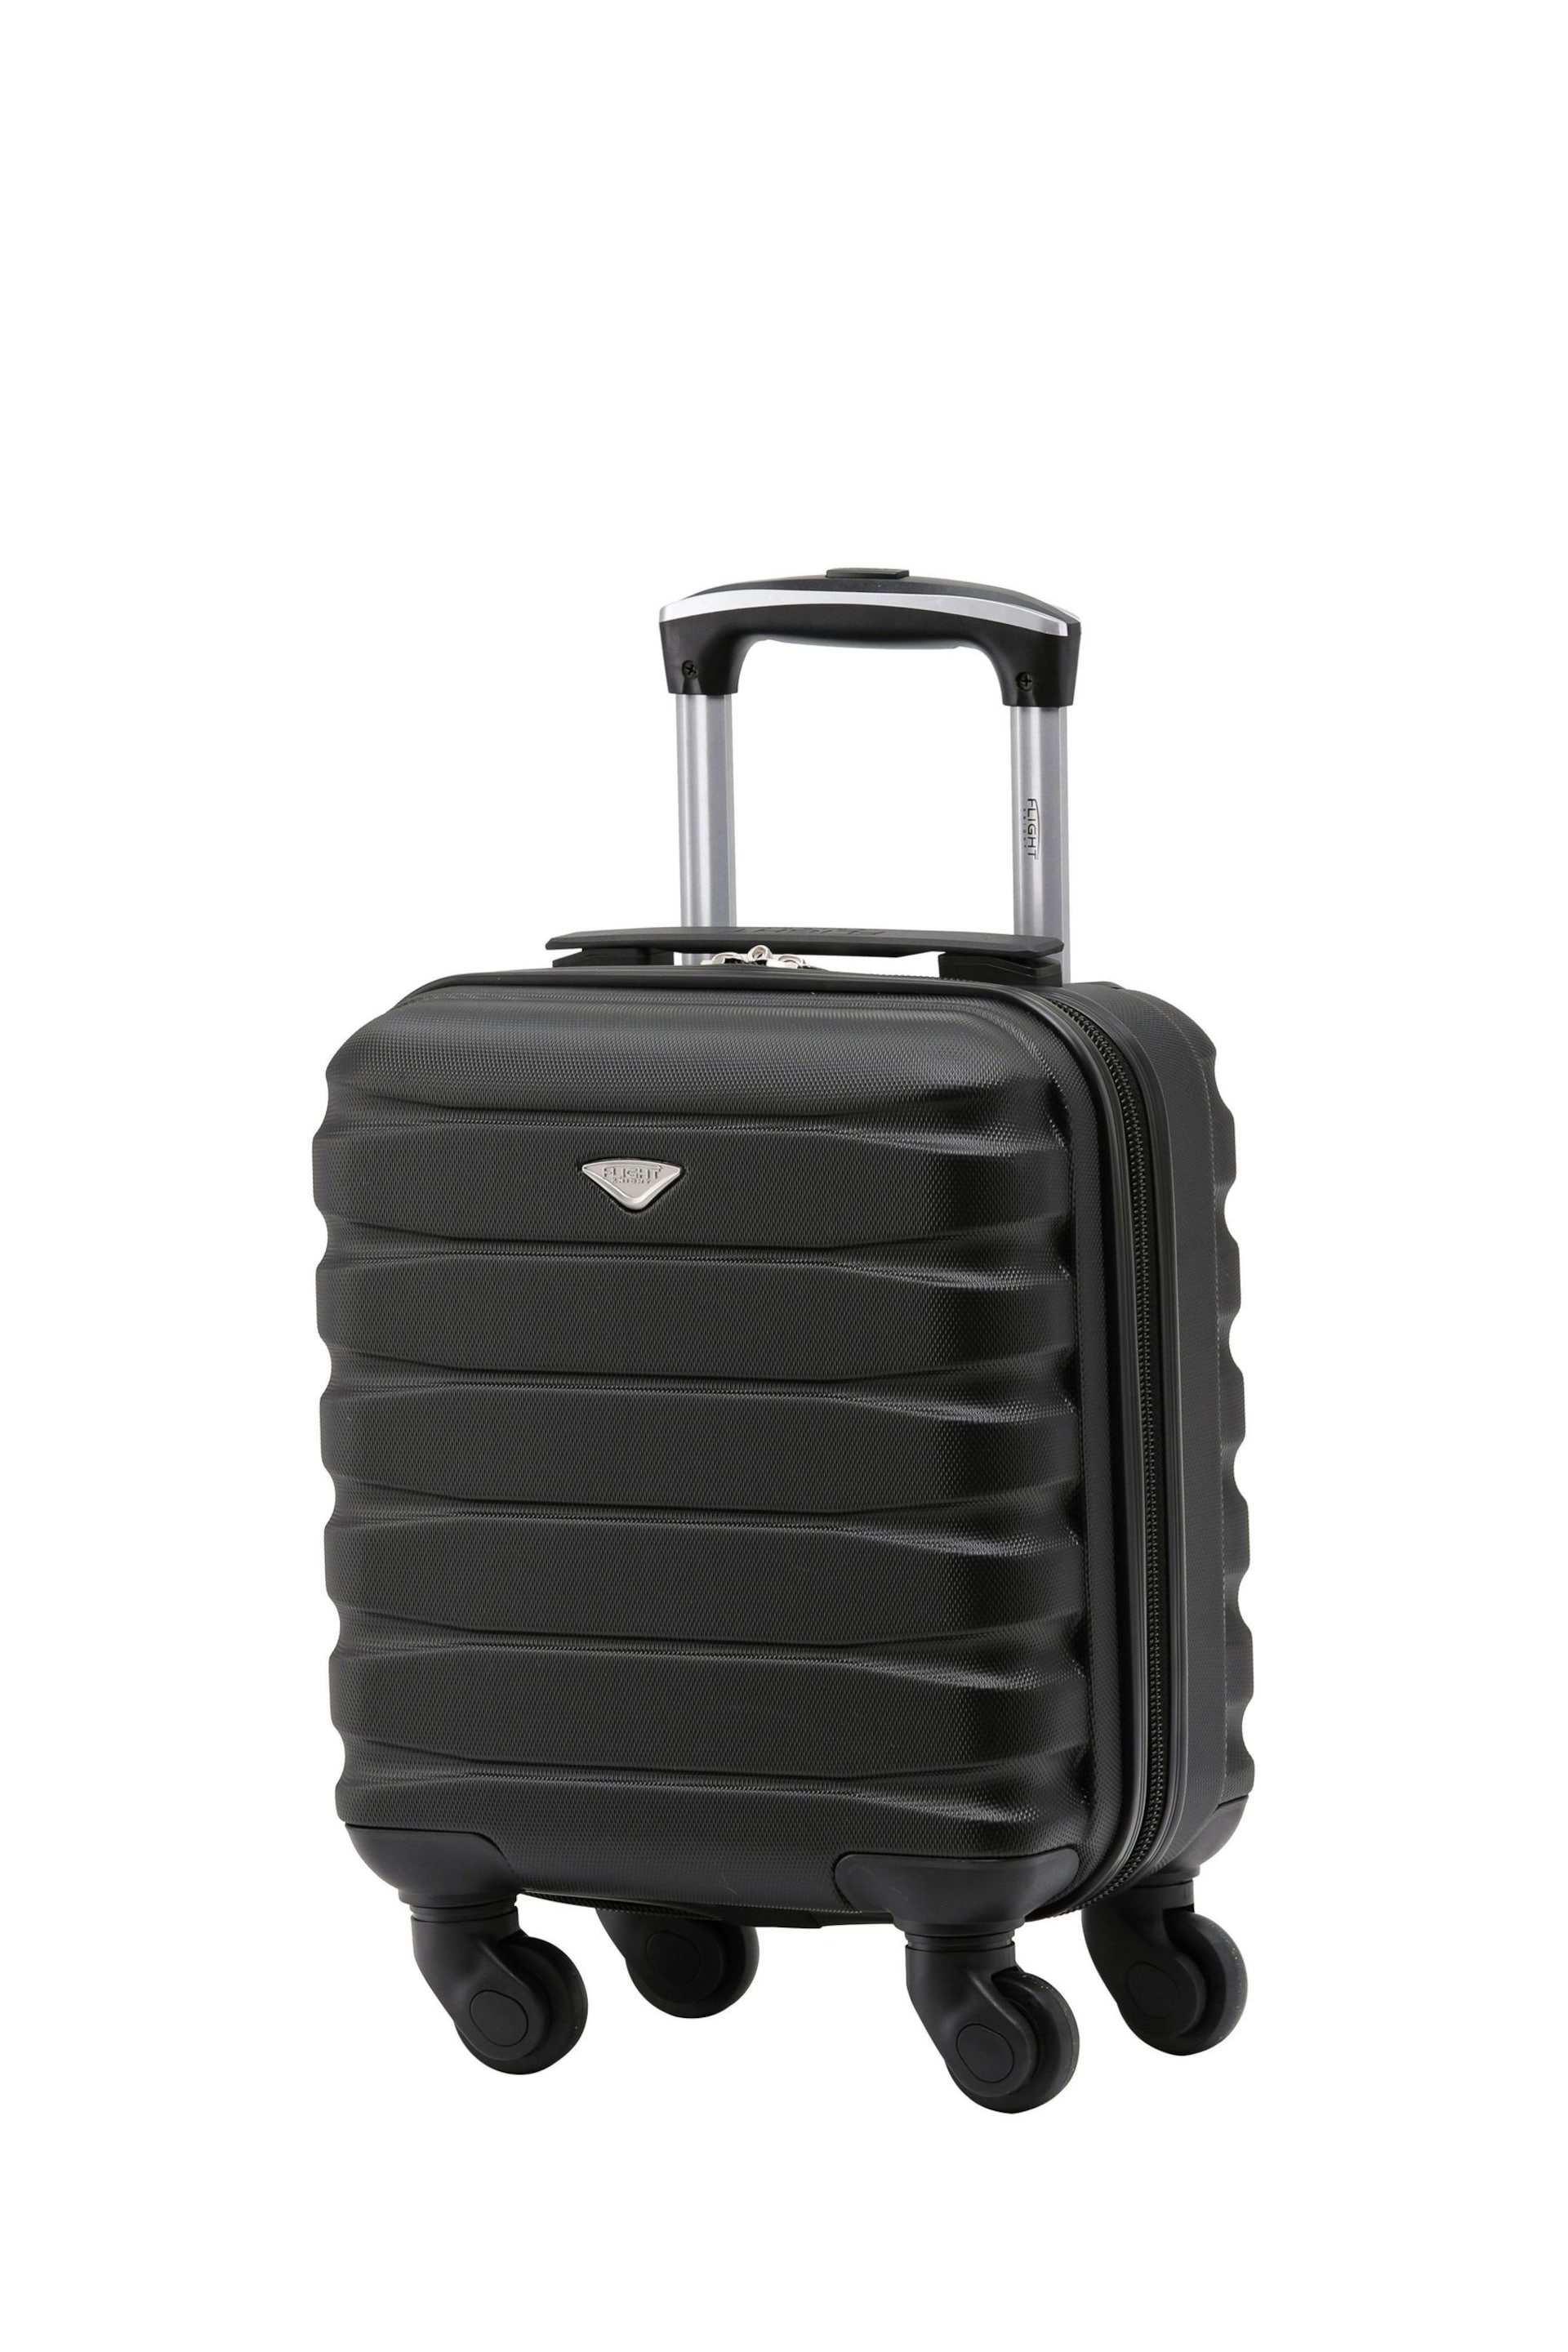 Flight Knight Charcoal 40x30x20cm Wizz Air Underseat 4 Wheel ABS Hard Case Cabin Carry On Hand Luggage - Image 1 of 6